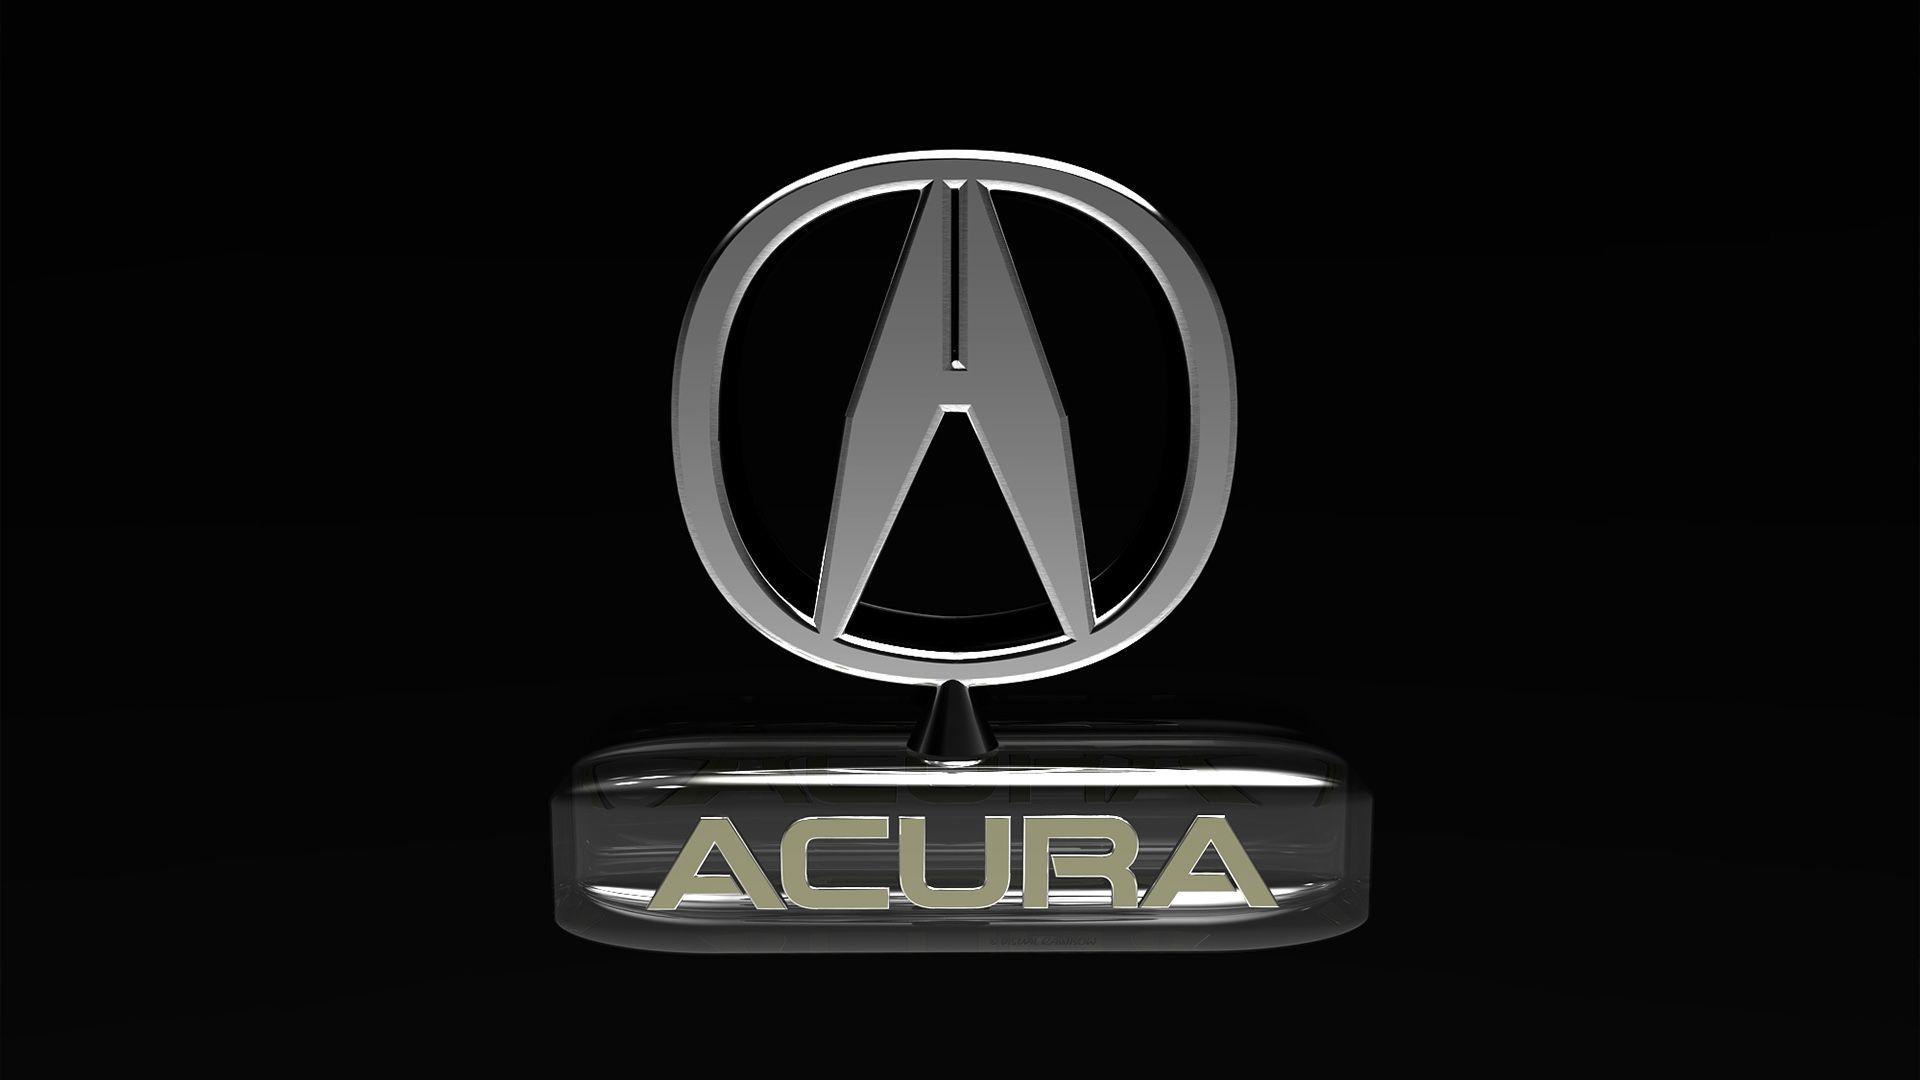 Acura logo wallpapers